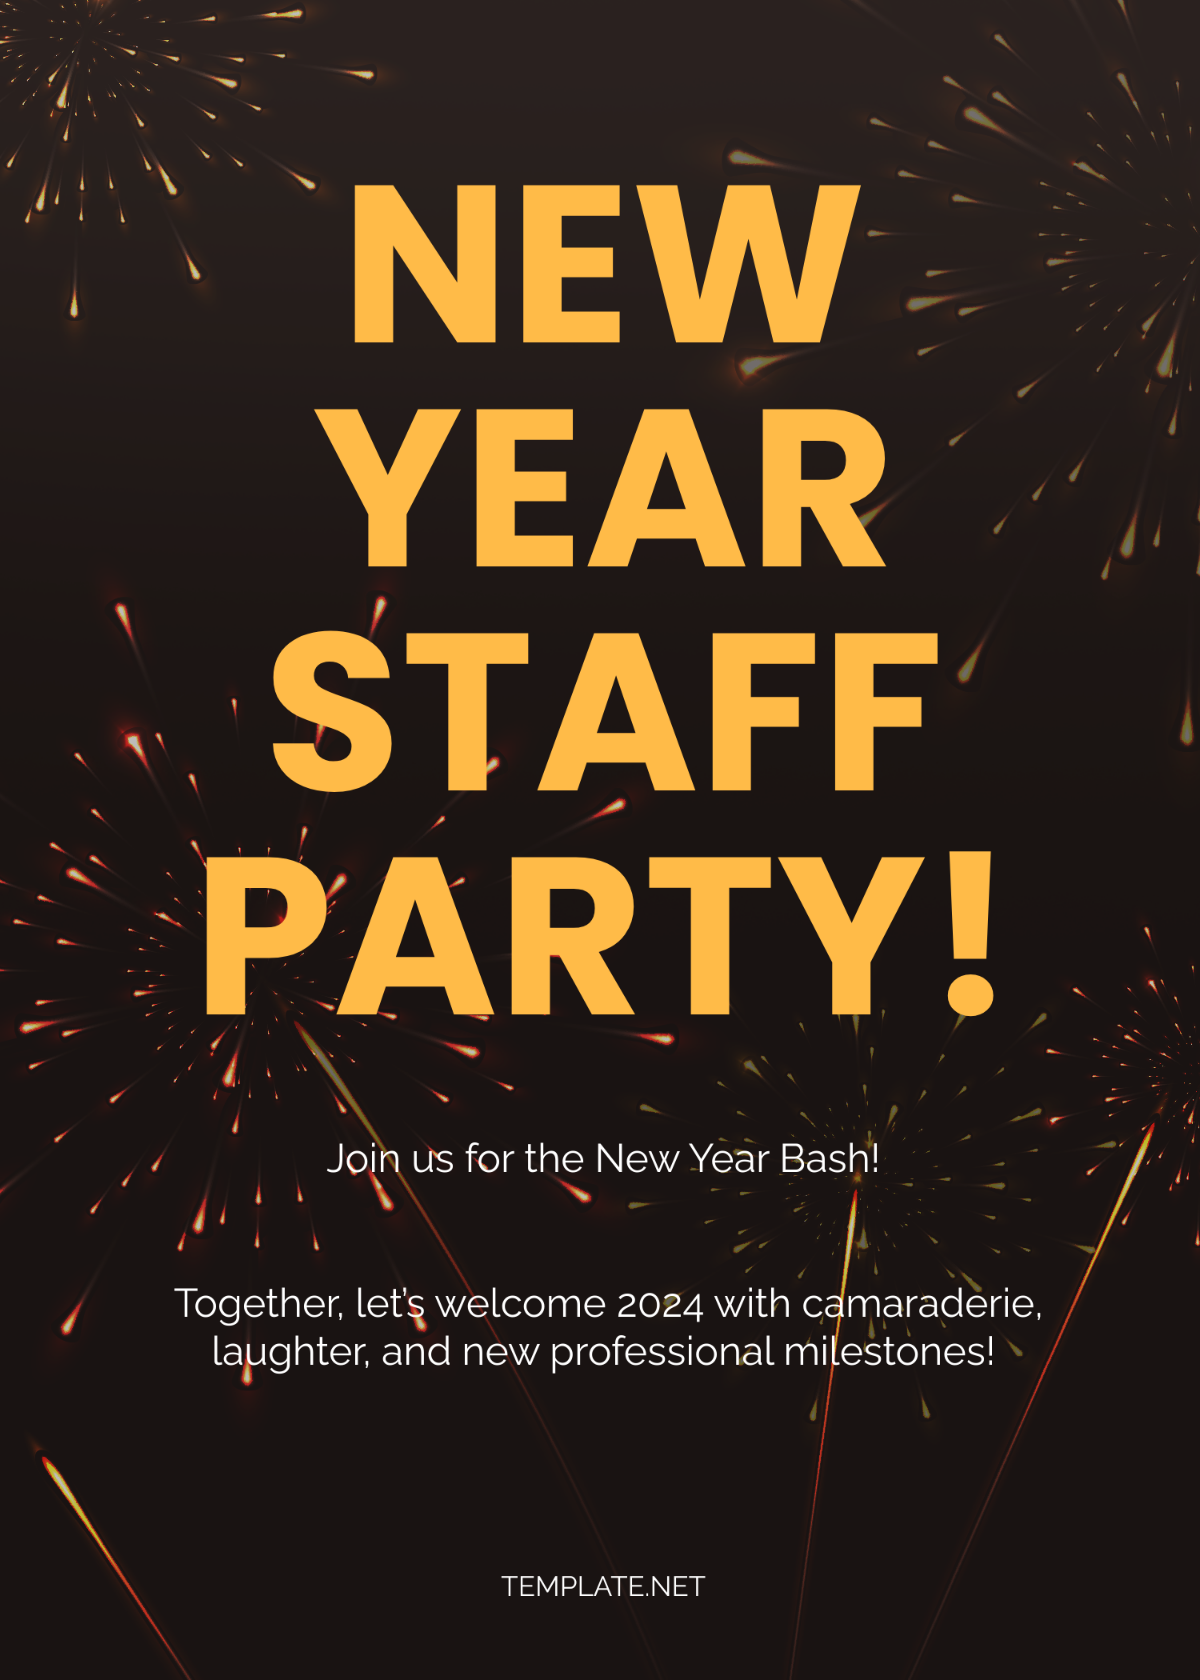 New Year Staff Party Invitation